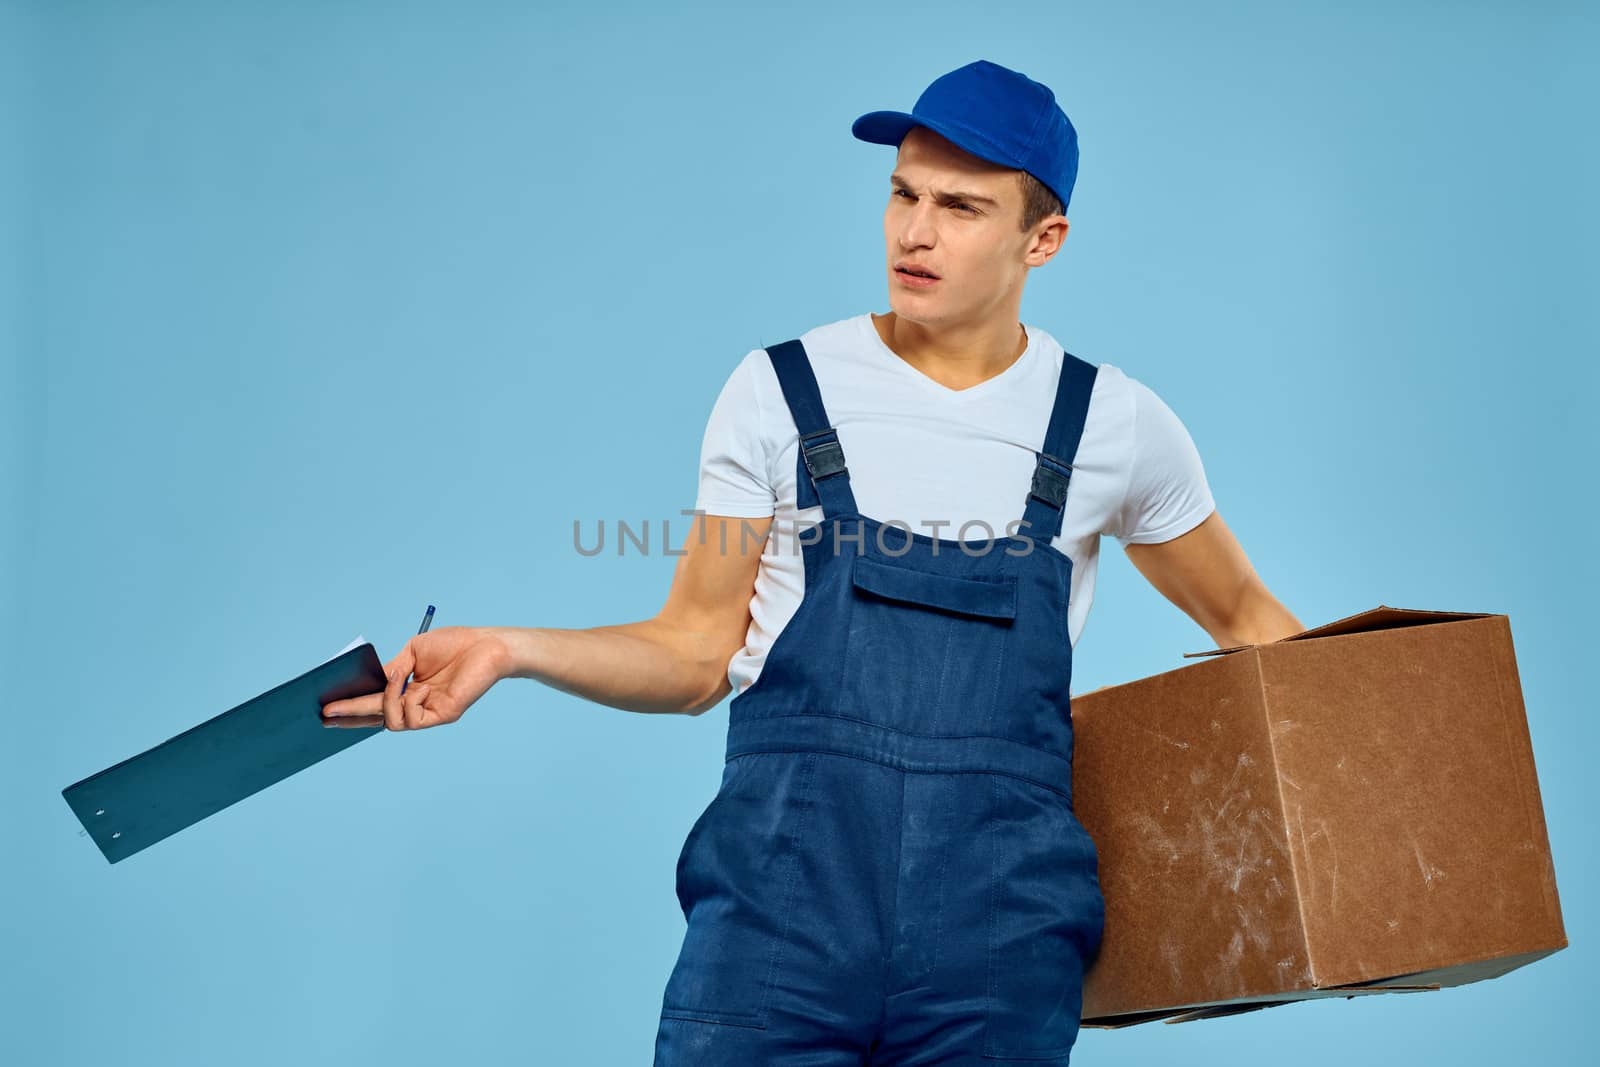 Man worker with cardboard box delivery loader lifestyle blue background. High quality photo